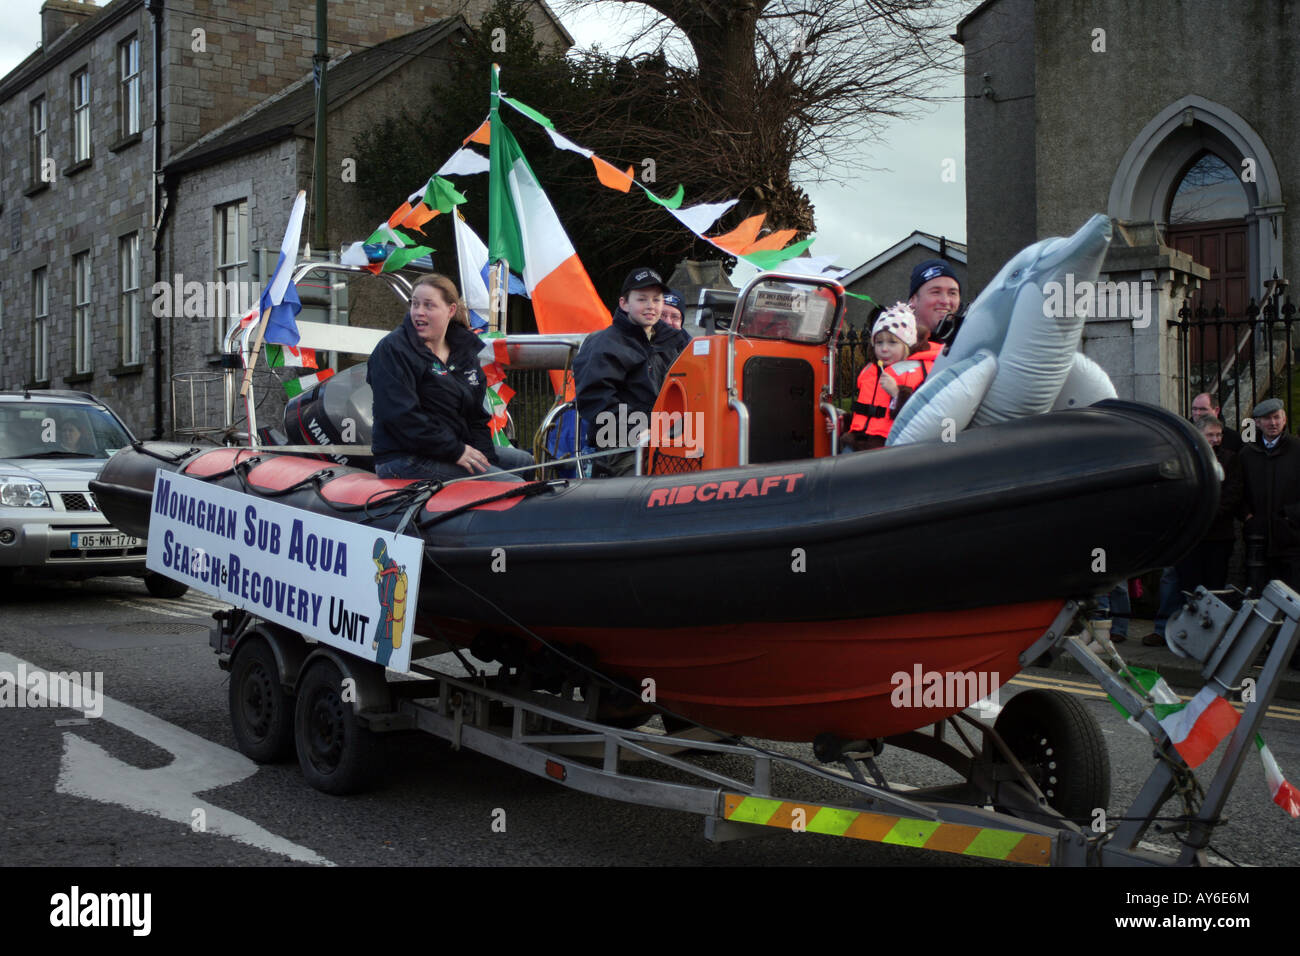 Monaghan Sub Aqua Search and Rescue St Patrick s Day Parade Carrickmacross County Monaghan Stock Photo